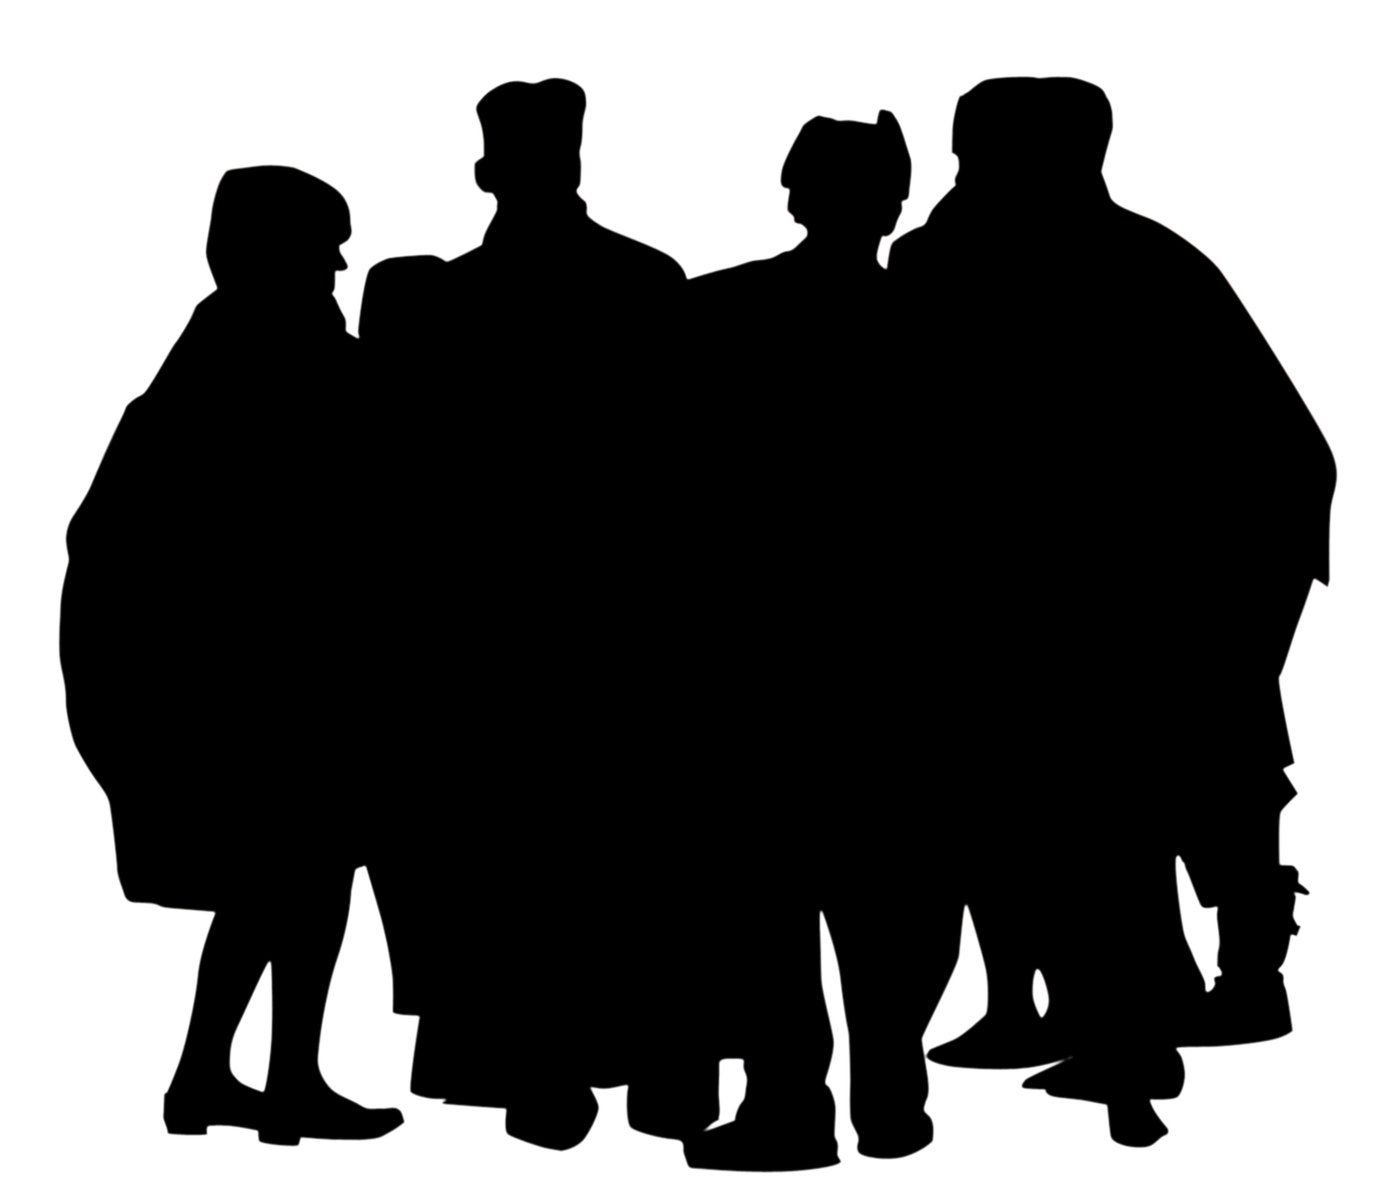 a group of people standing in the shadow of their body